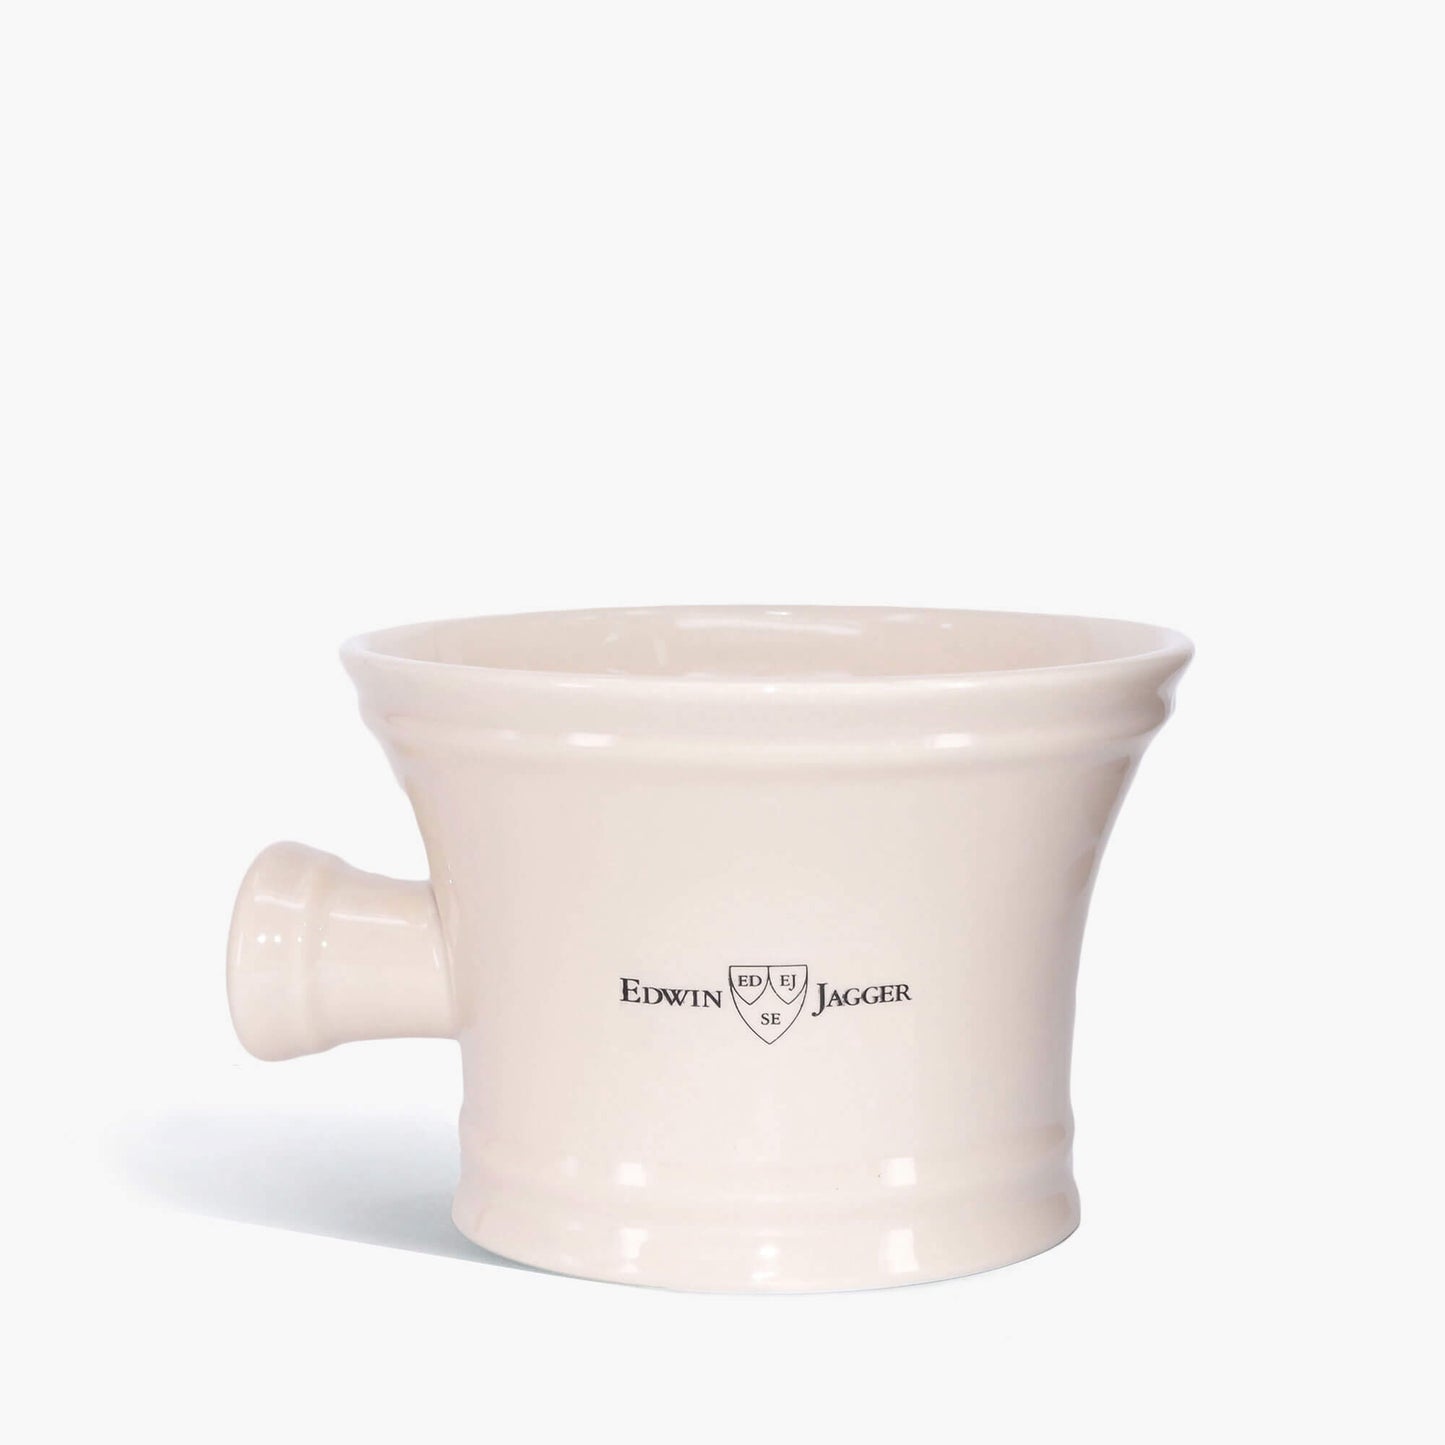 Edwin Jagger Ivory Porcelain Shaving Bowl with Handle